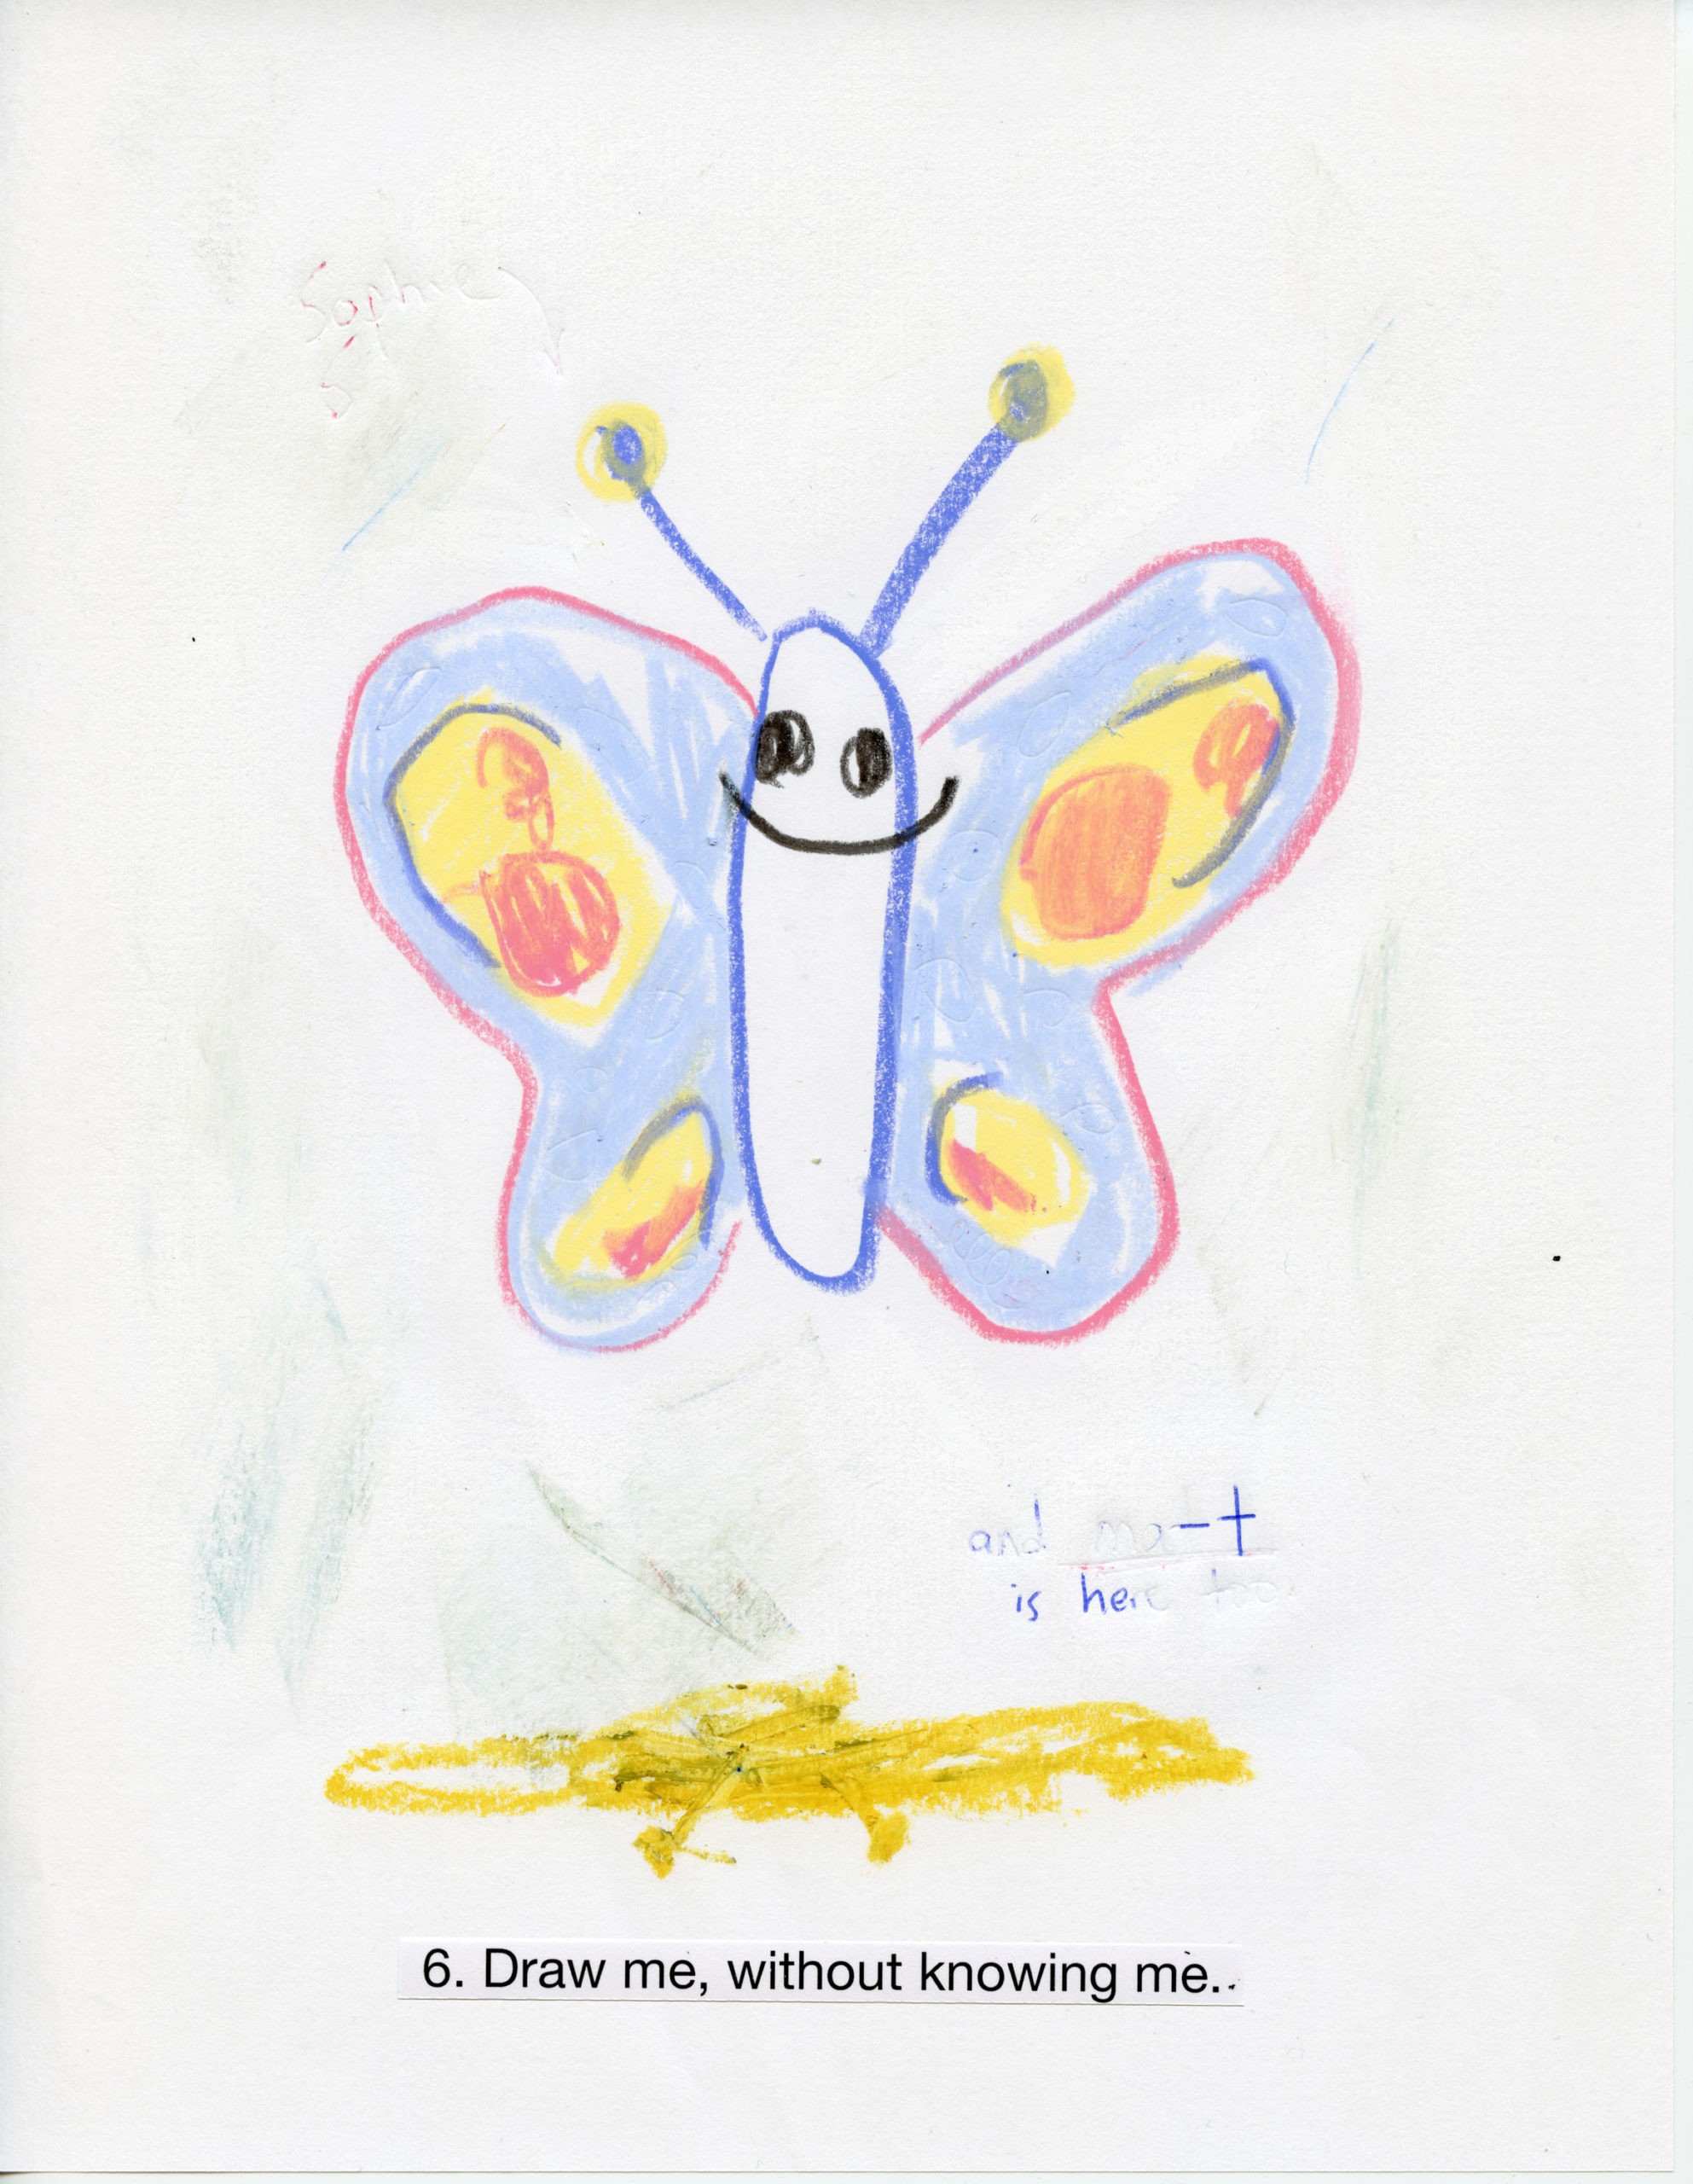 Daniel Bromberg Picture Interview Kollektiv Gallery Draw me without knowing me, answered with a drawing of a butterfly with a bit smile